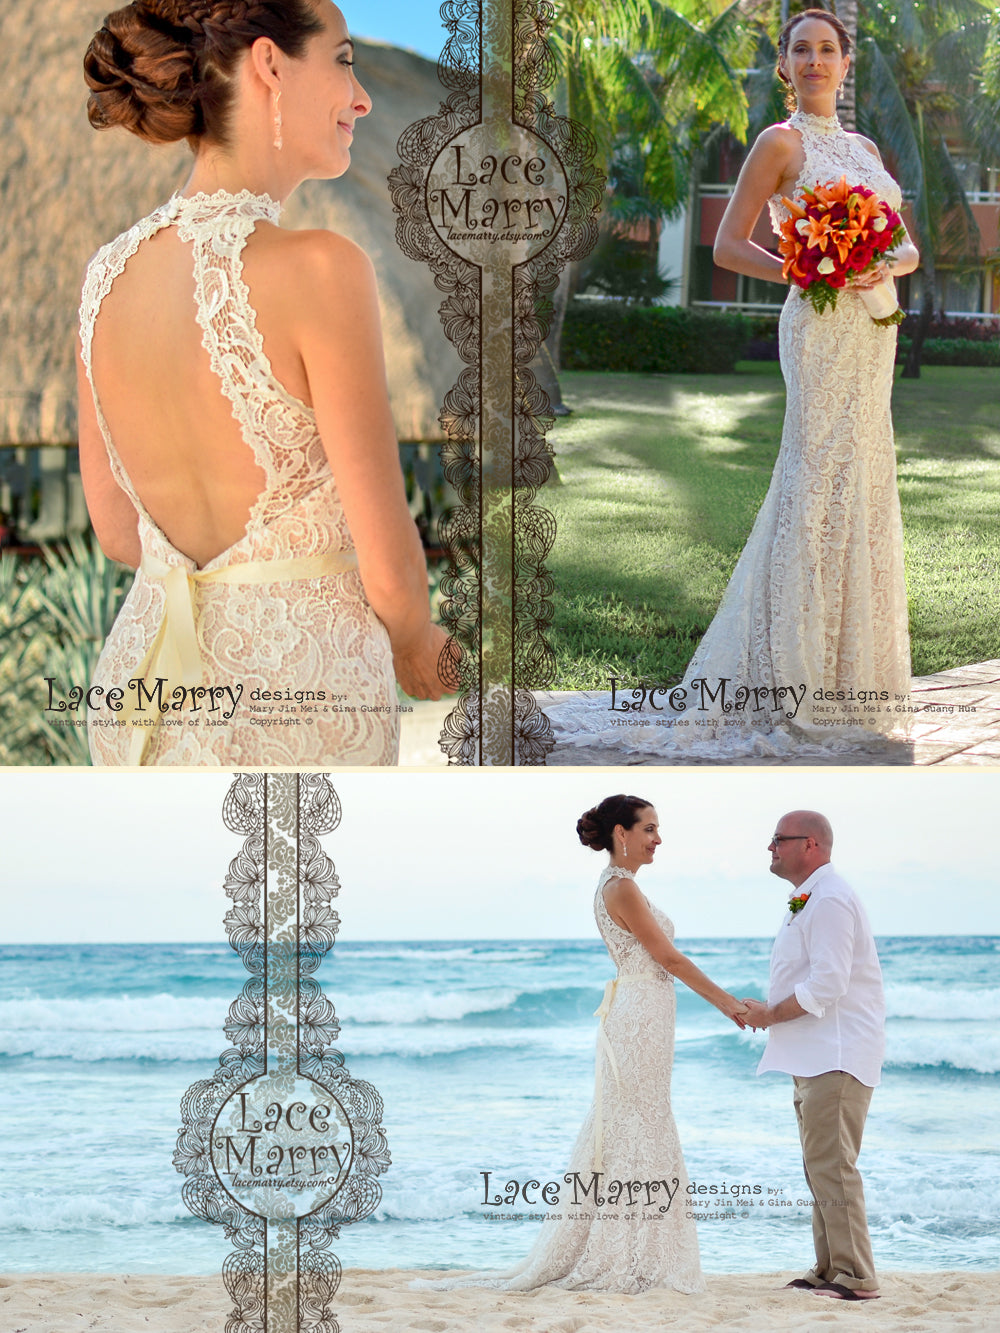 Gorgeous Venice Lace Wedding Dress in Slim Shape with Small Train